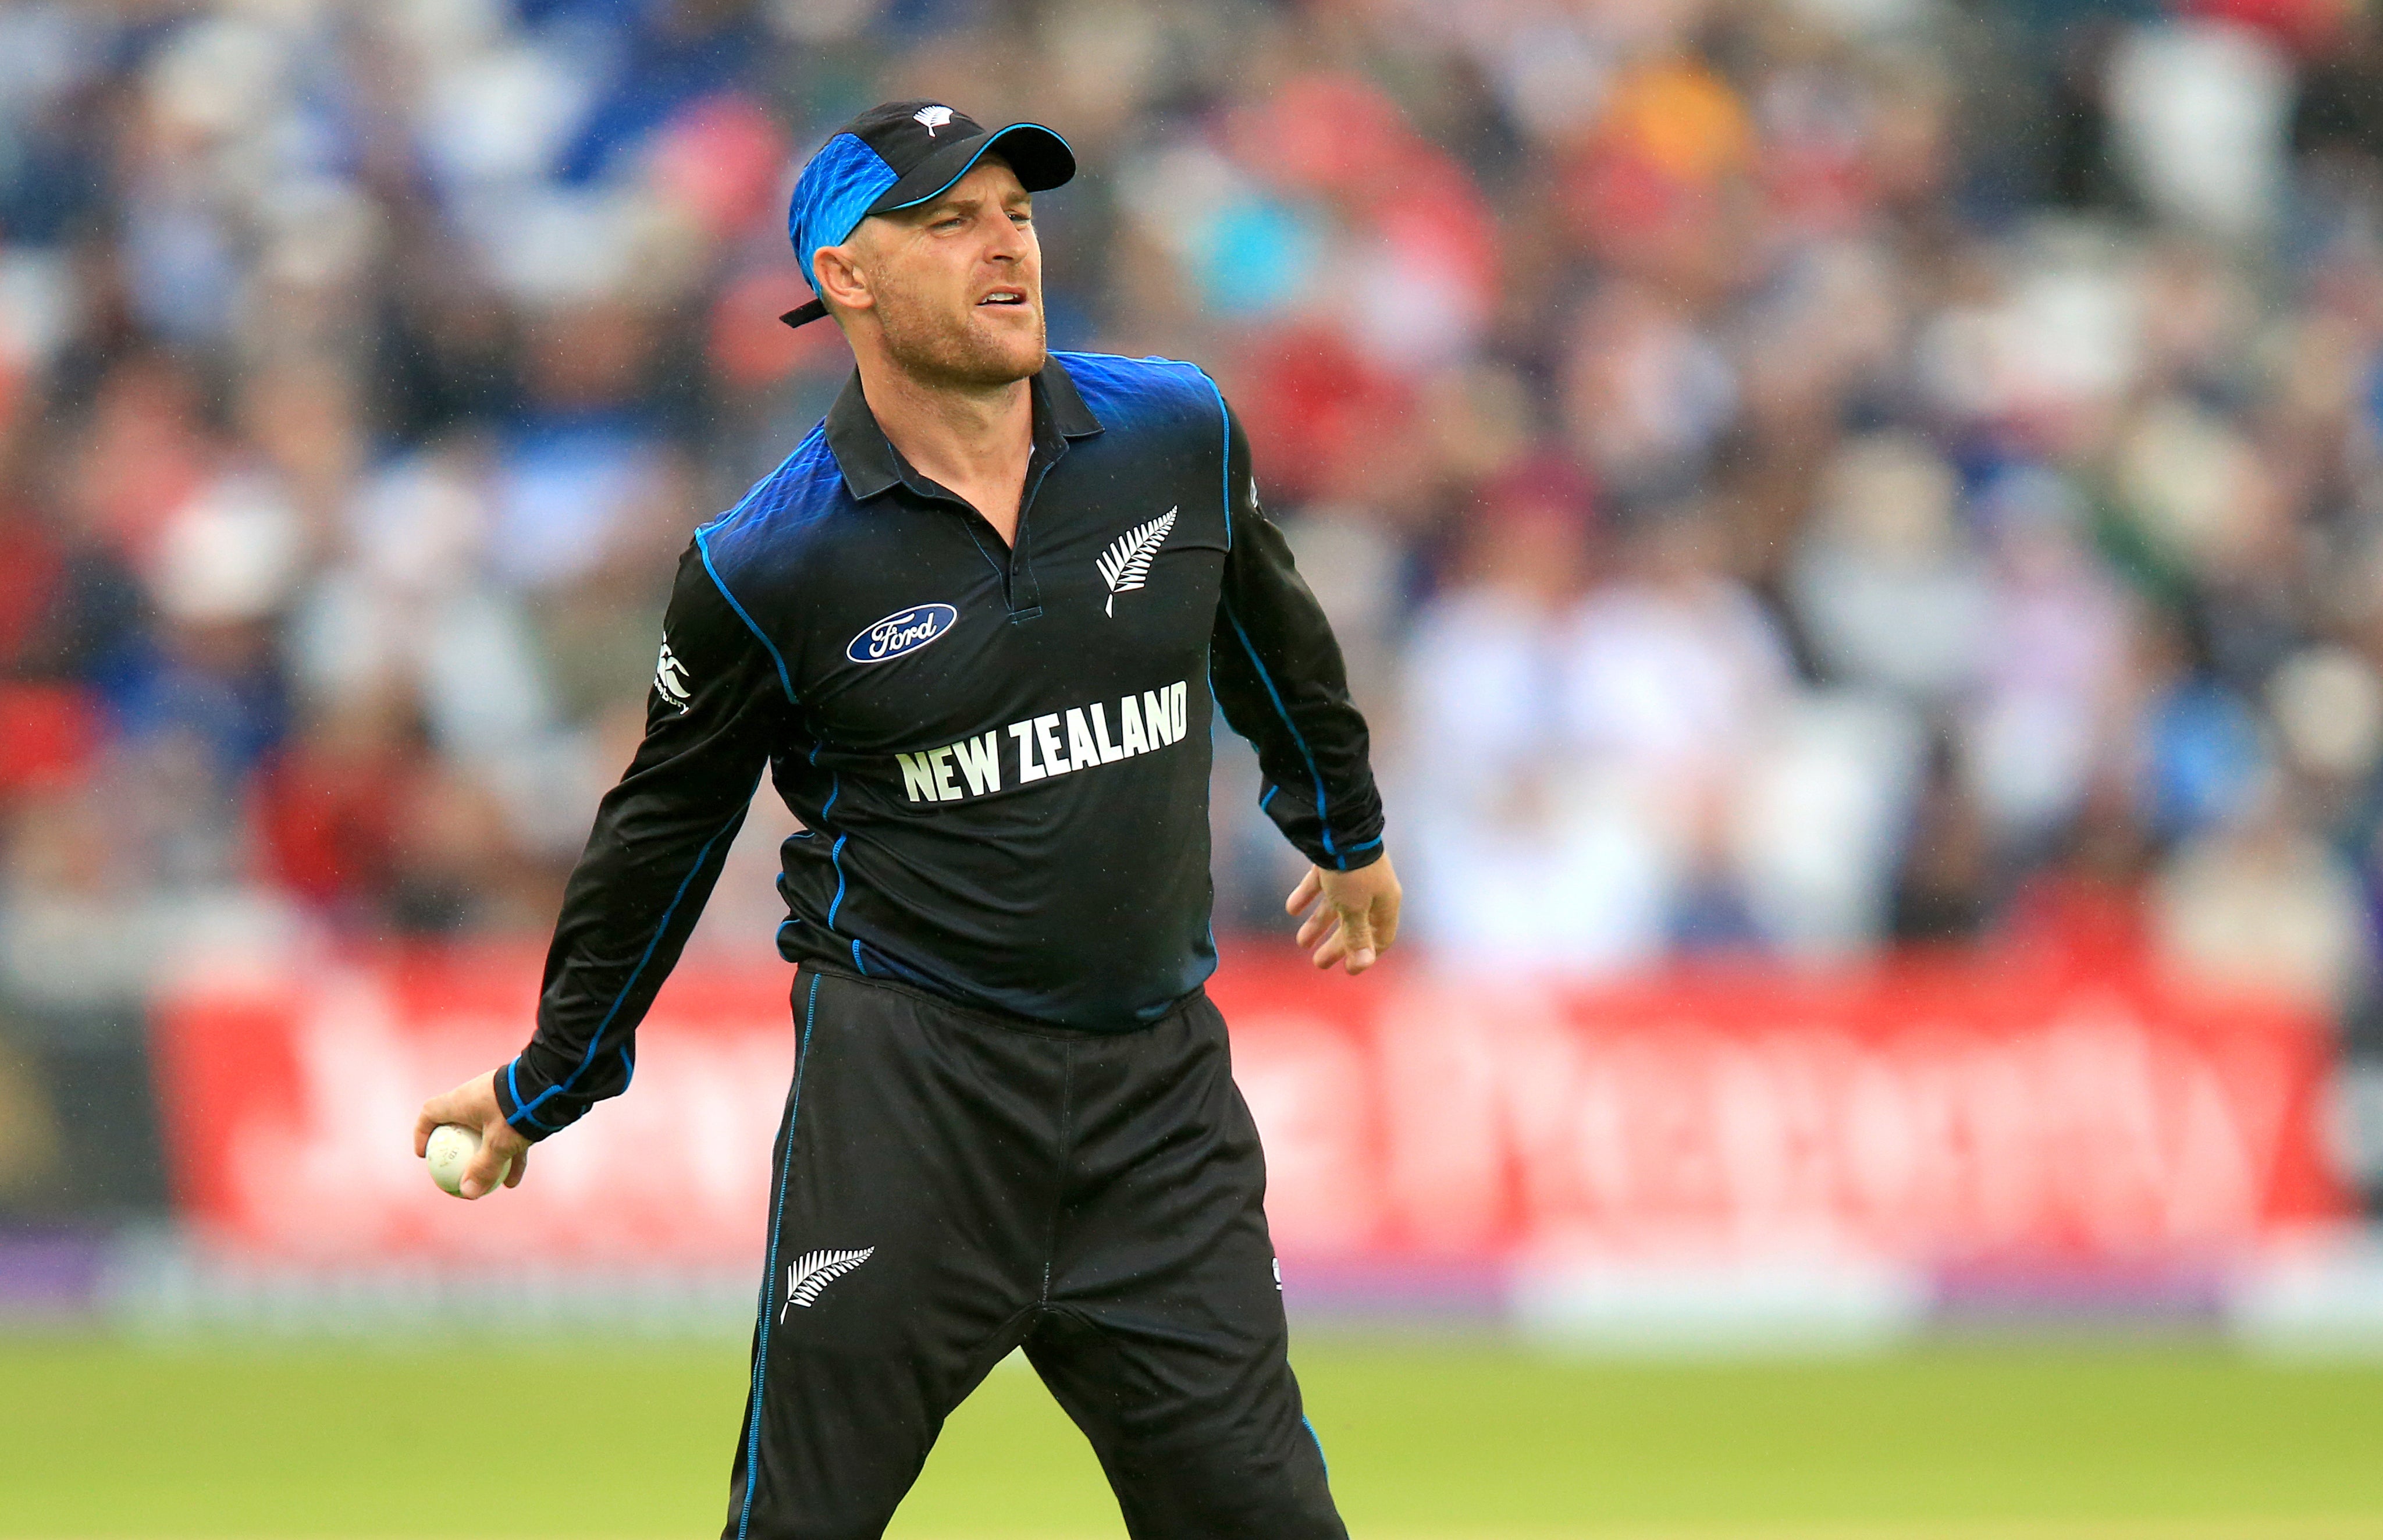 Brendon McCullum is England’s new Test coach (Mike Egerton/PA)